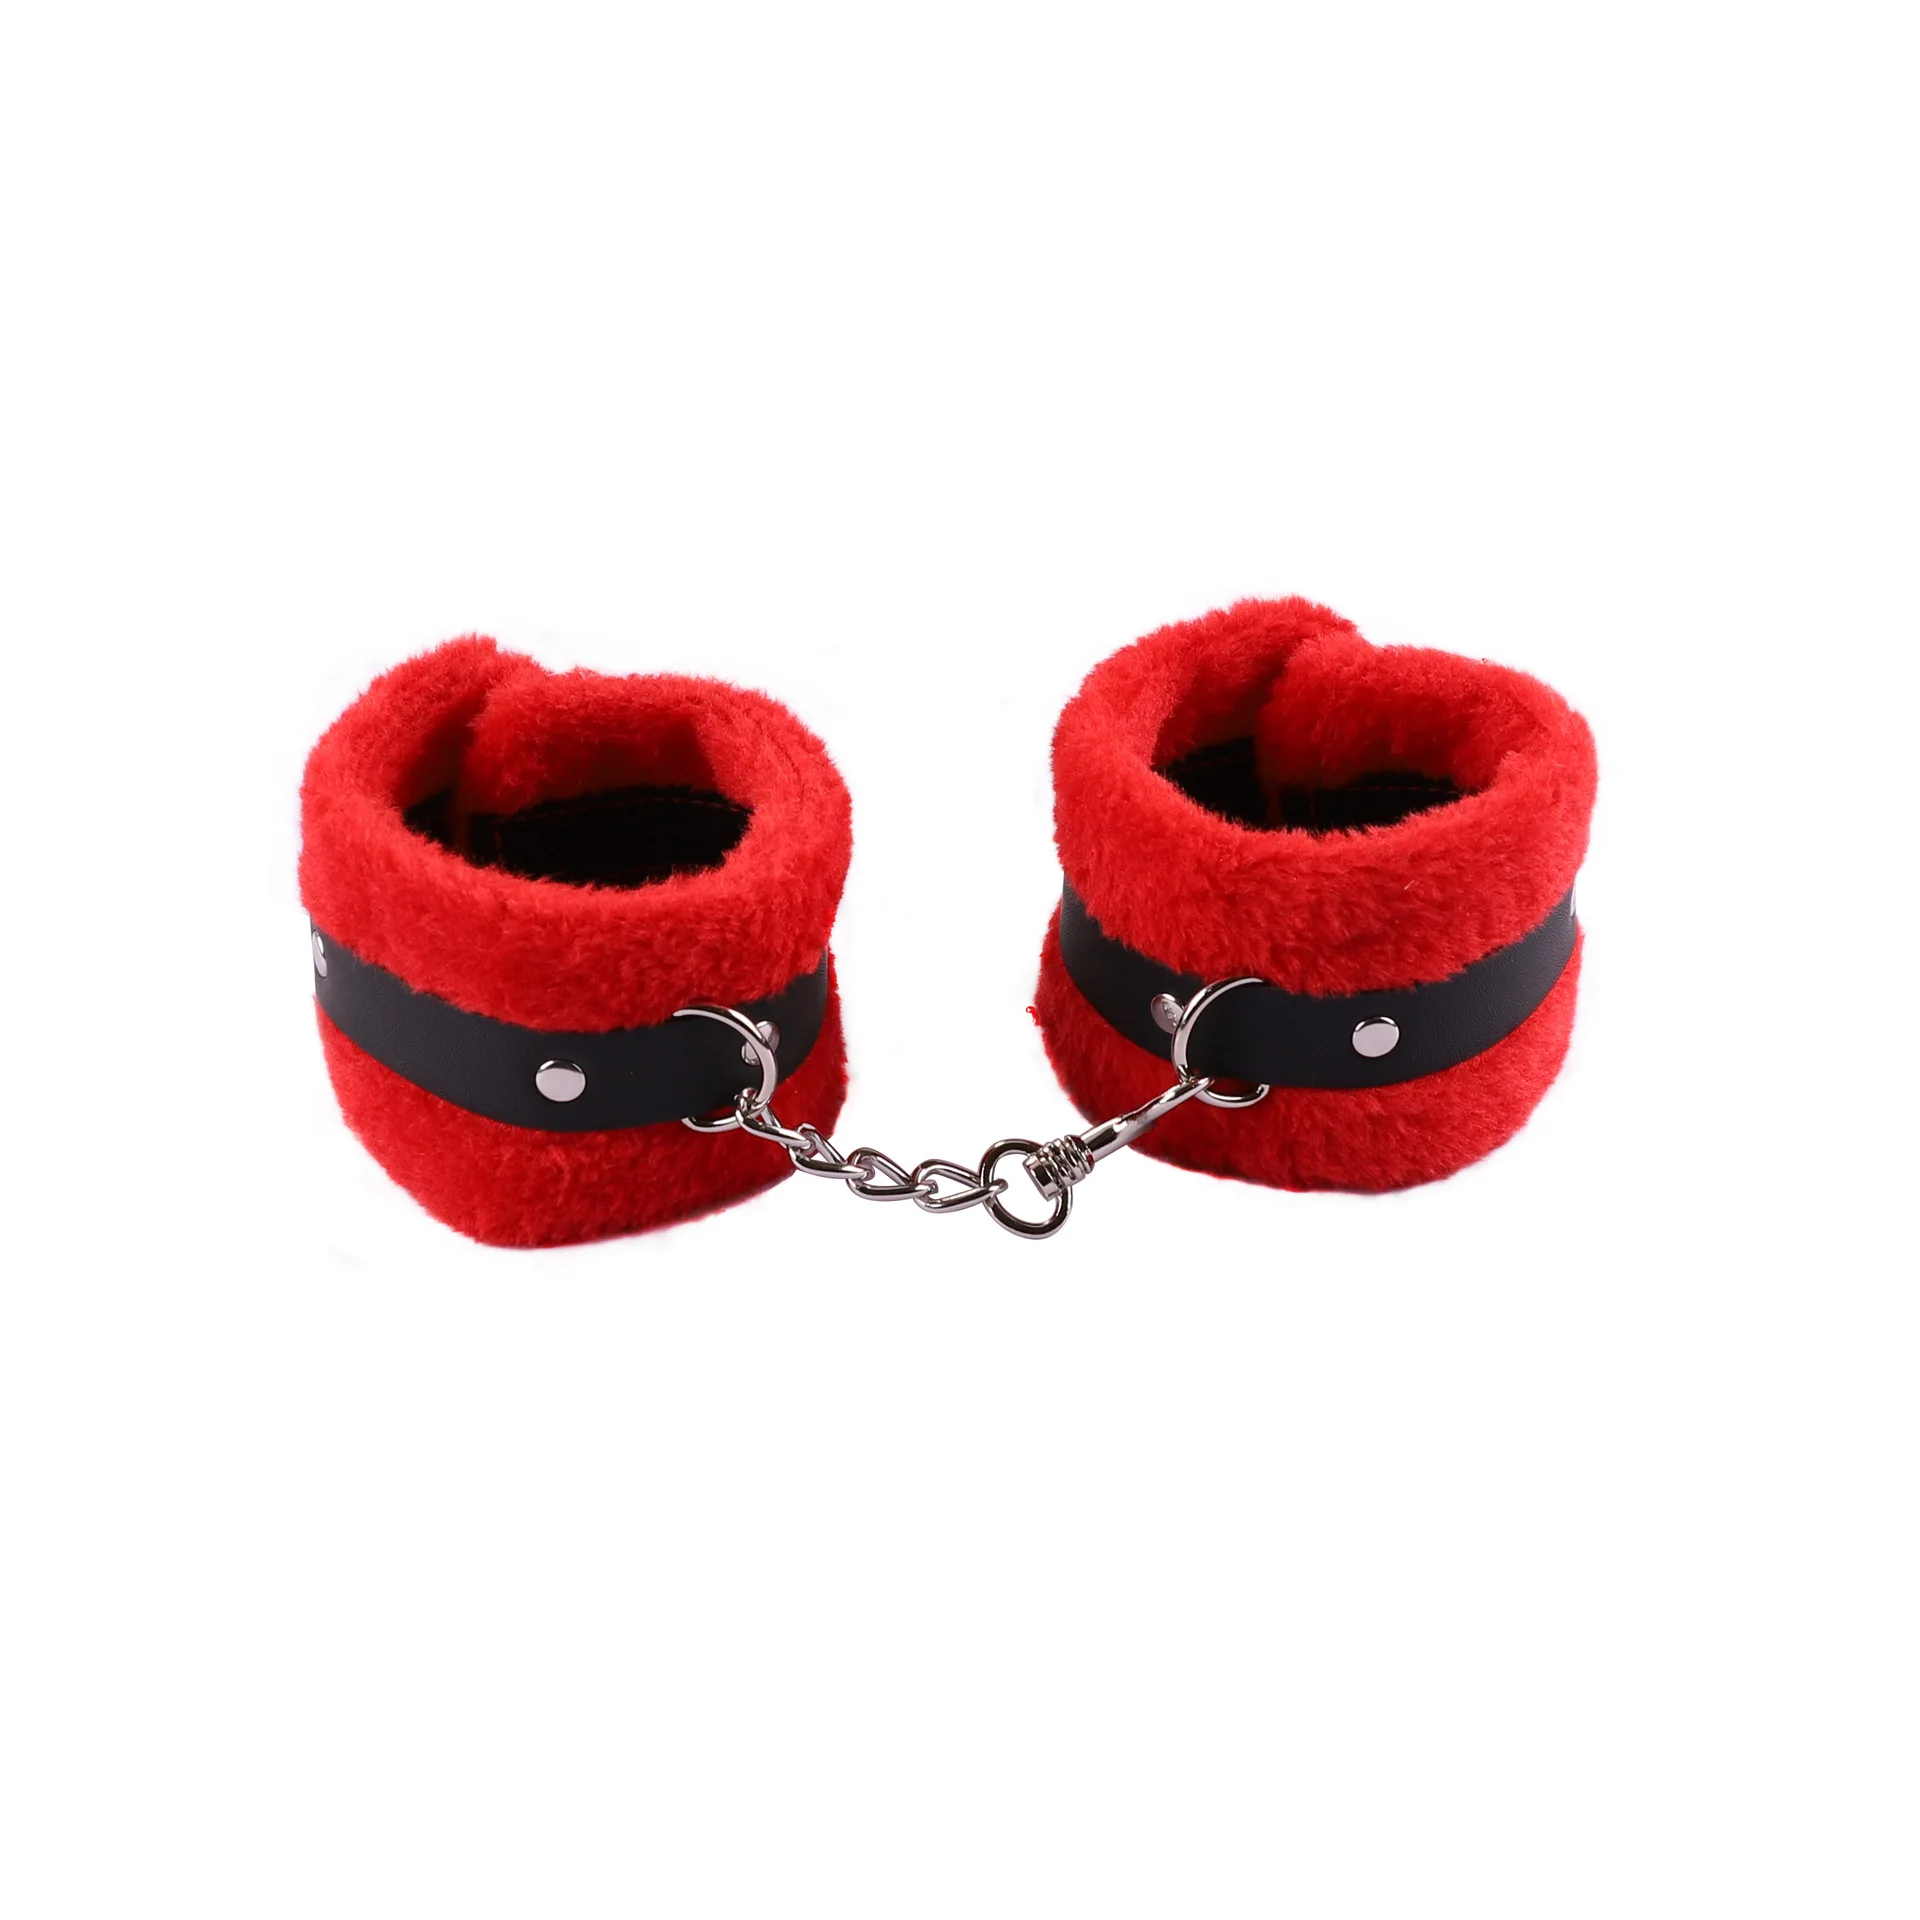 SM Handcuffs Toy Adjustable PU Leather Plush Handcuffs Blindfold Masks Restraints Bondage Sex Toy For Adults Games Accessories